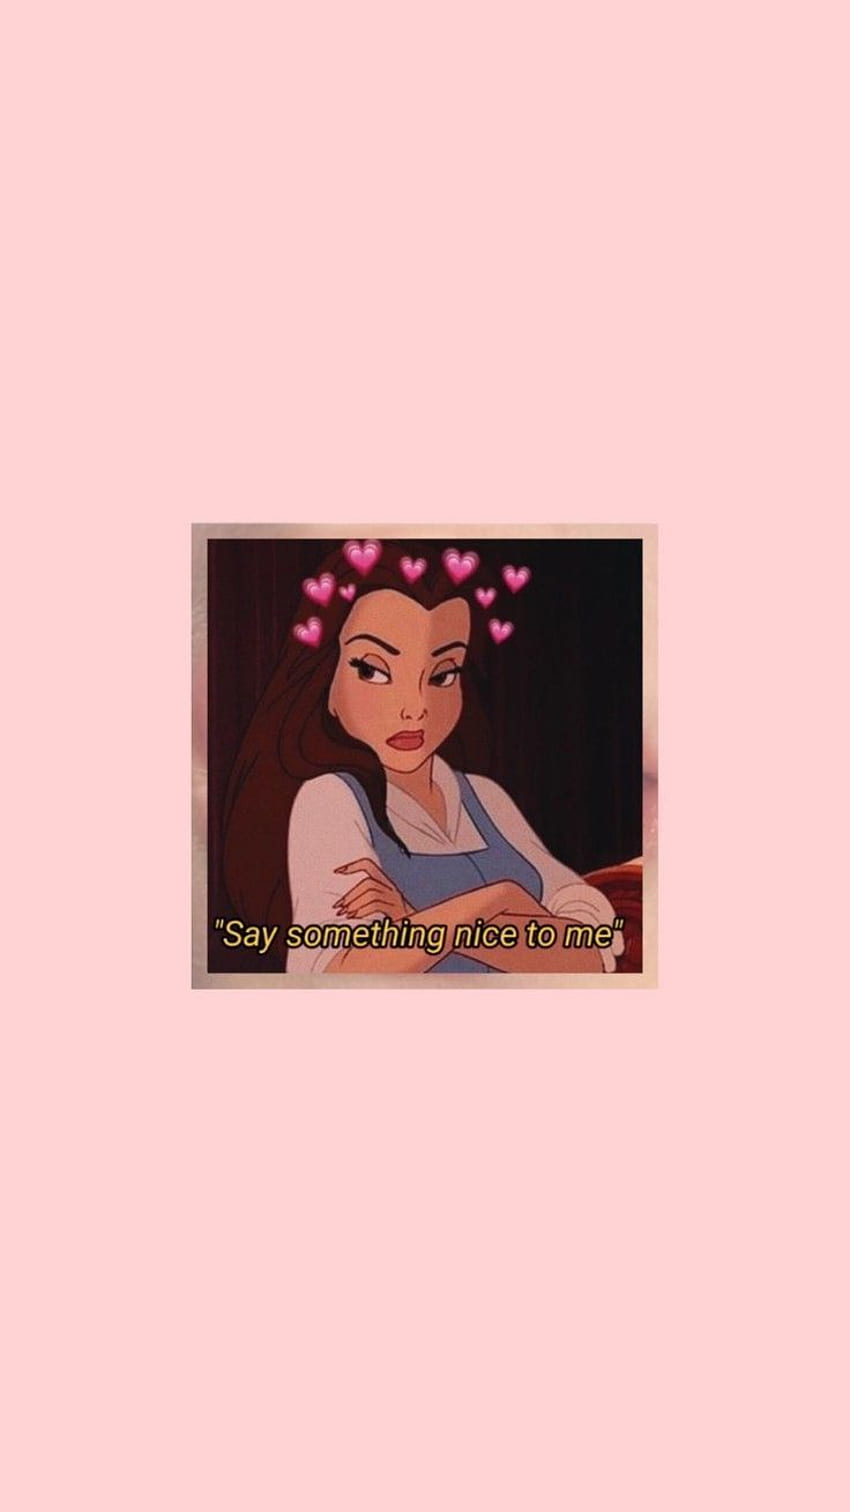 Aesthetic Disney Princess wallpaper with the quote 